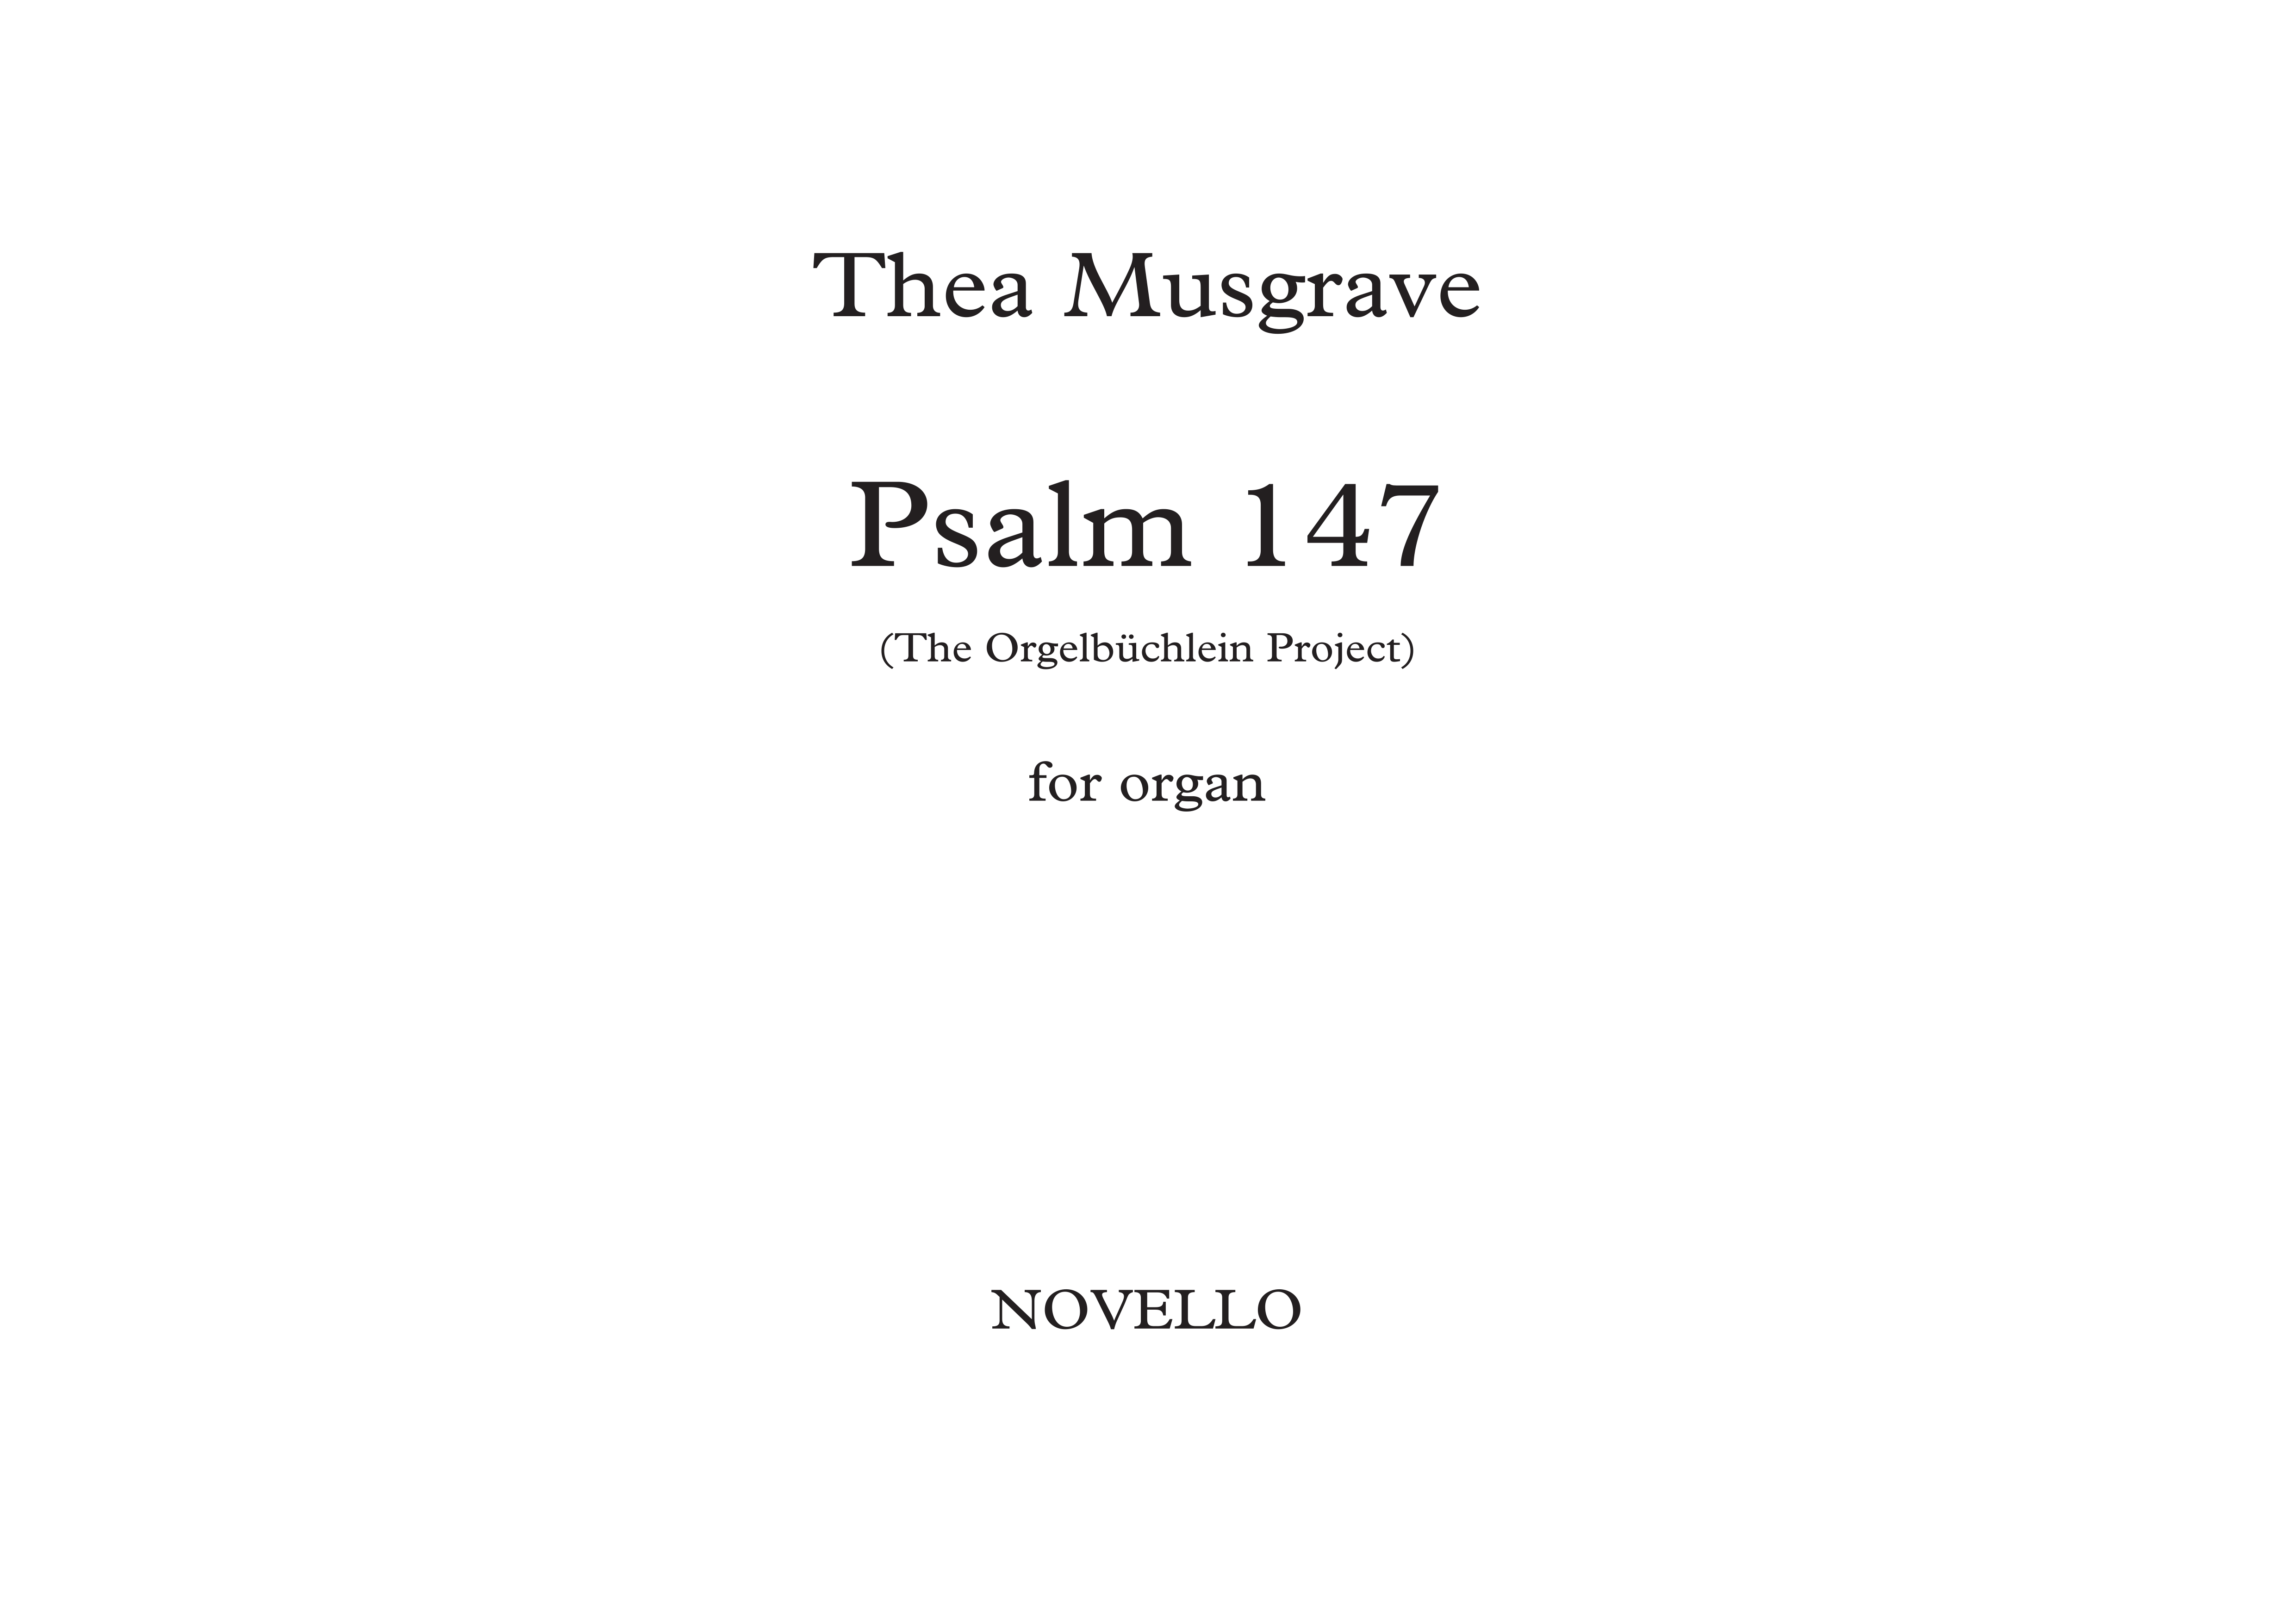 Thea Musgrave: Psalm 147 - The Orgelbiichlein Project: Organ: Instrumental Work